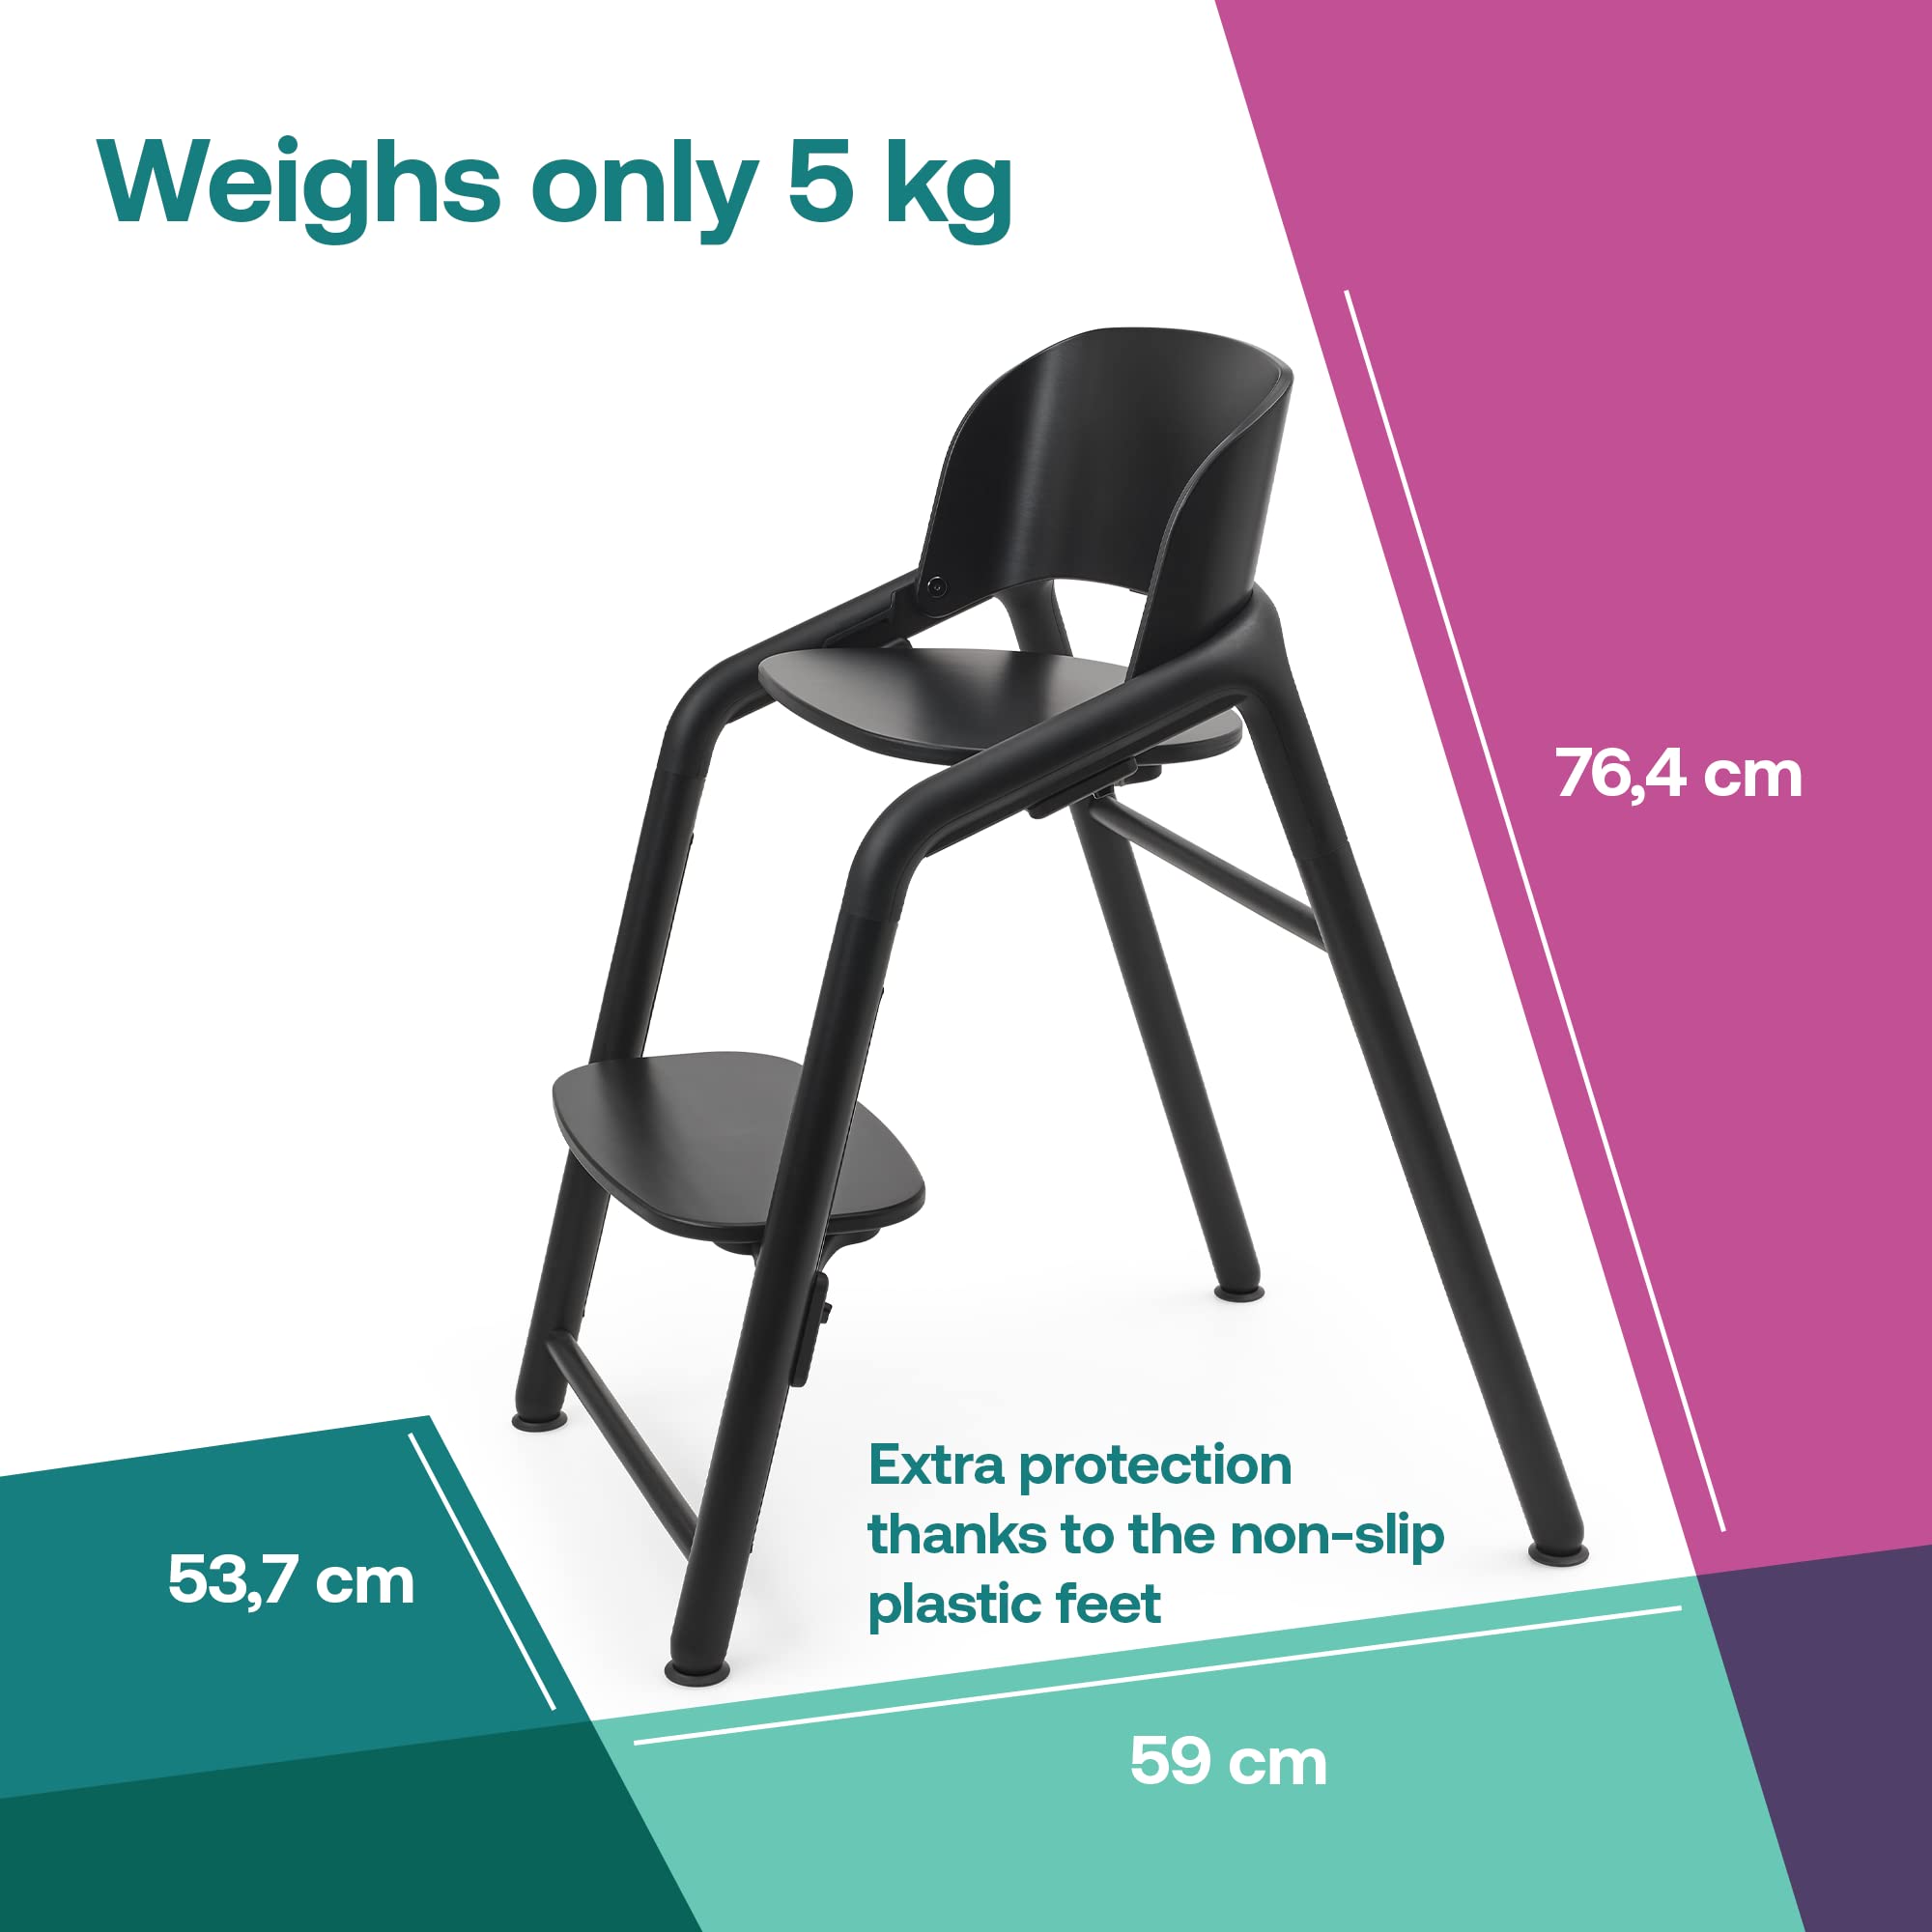 Bugaboo Giraffe Wooden Baby High Chair, Adjustable in 1 Second, Easy to Clean, Safe and Ergonomic Highchair, Suitable from Birth in Combination with Newborn Set (Sold Separately), Black